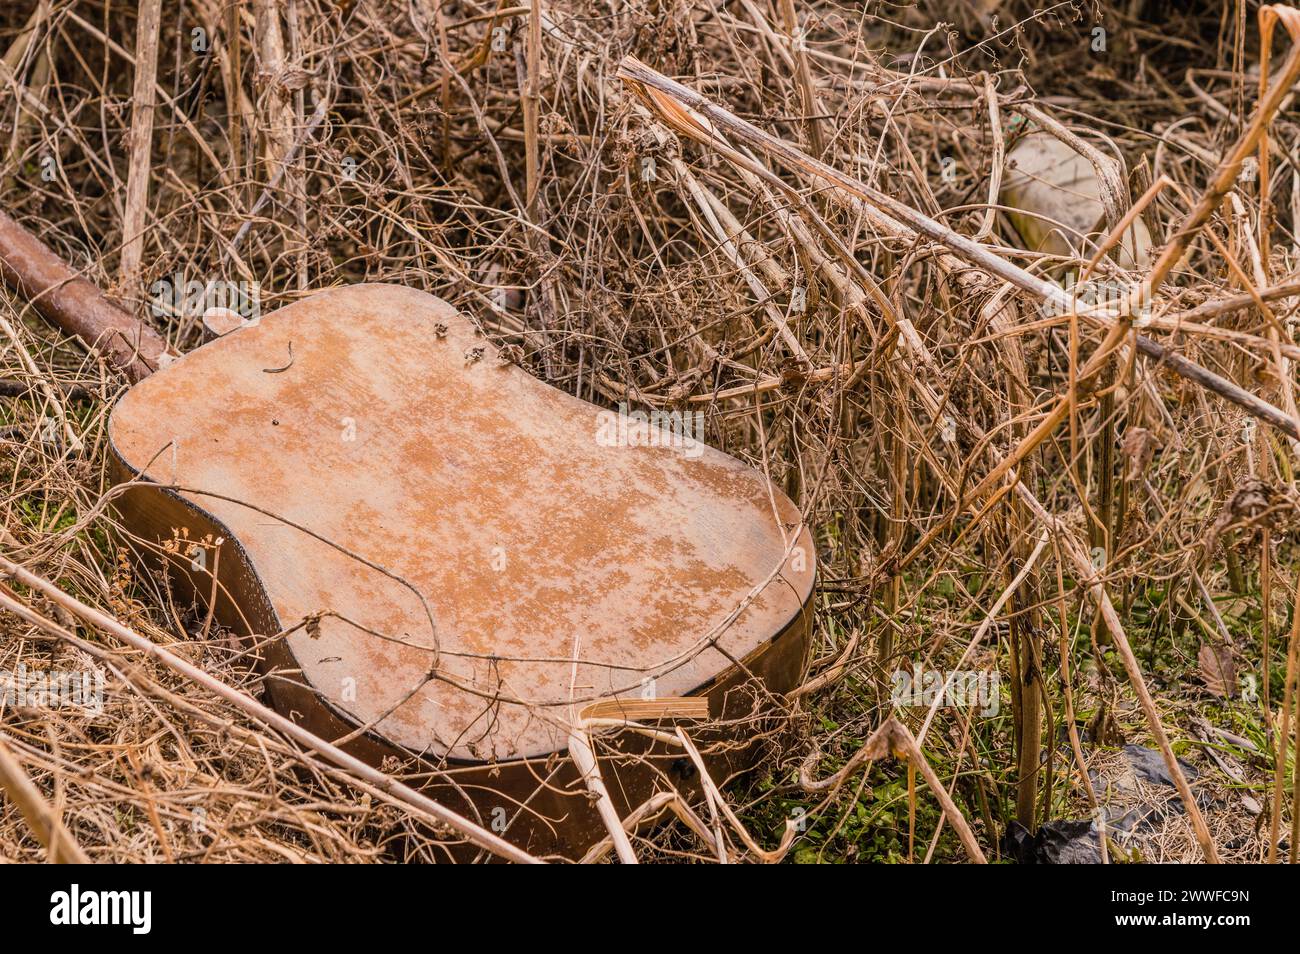 A old discarded guitar in overgrown grass, telling a story of decay and neglect, in South Korea Stock Photo